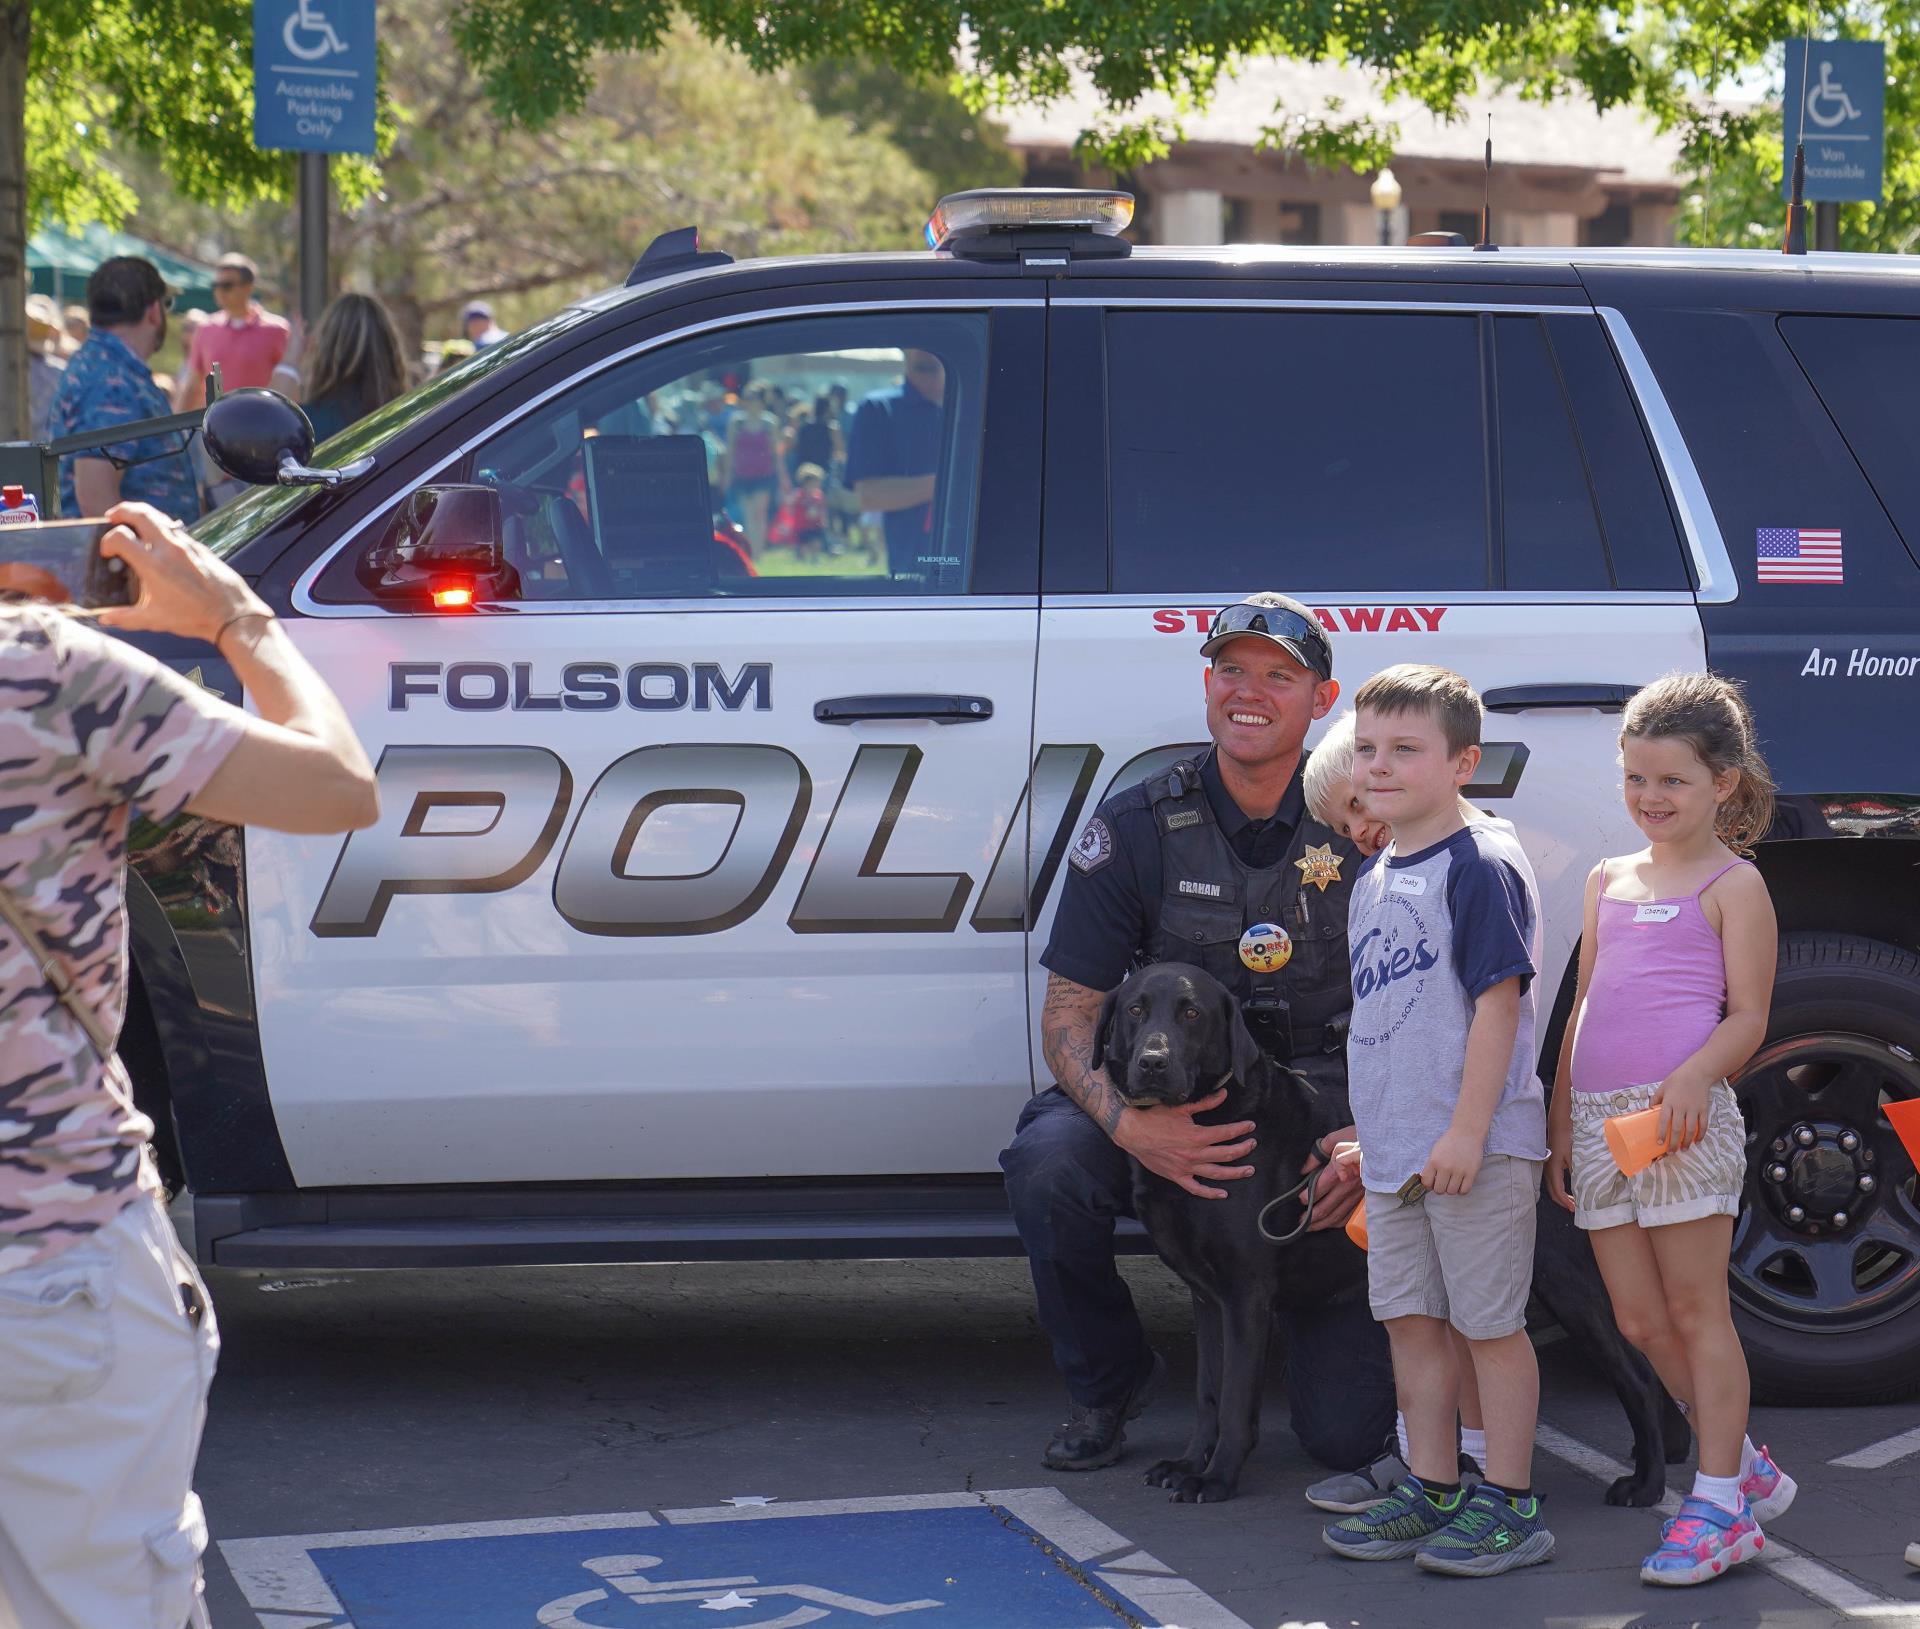 Police office posing for photo with kids